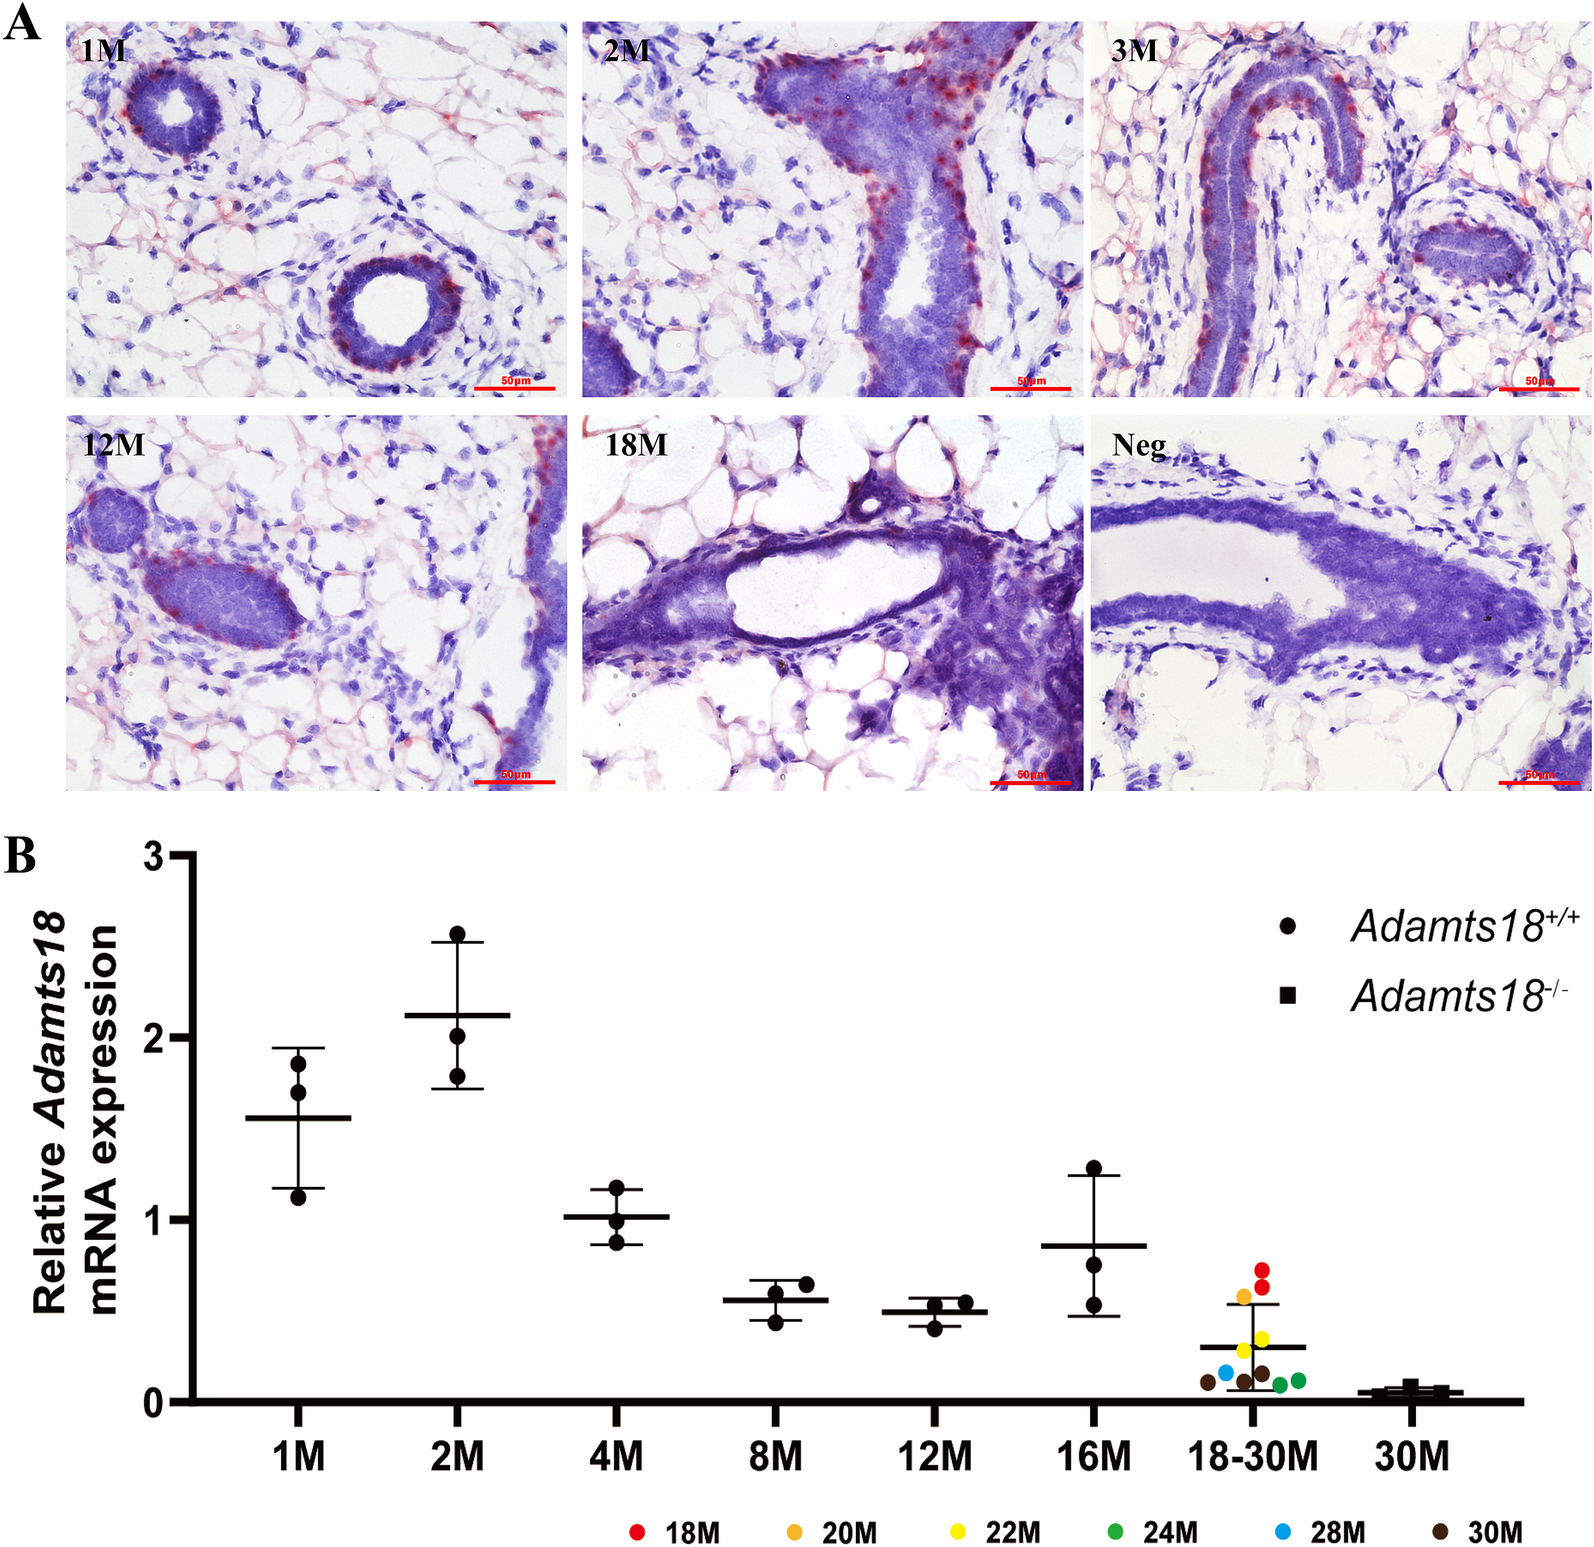 ADAMTS18 deficiency associates extracellular matrix dysfunction with a higher risk of HER2-positive mammary tumorigenesis and metastasis